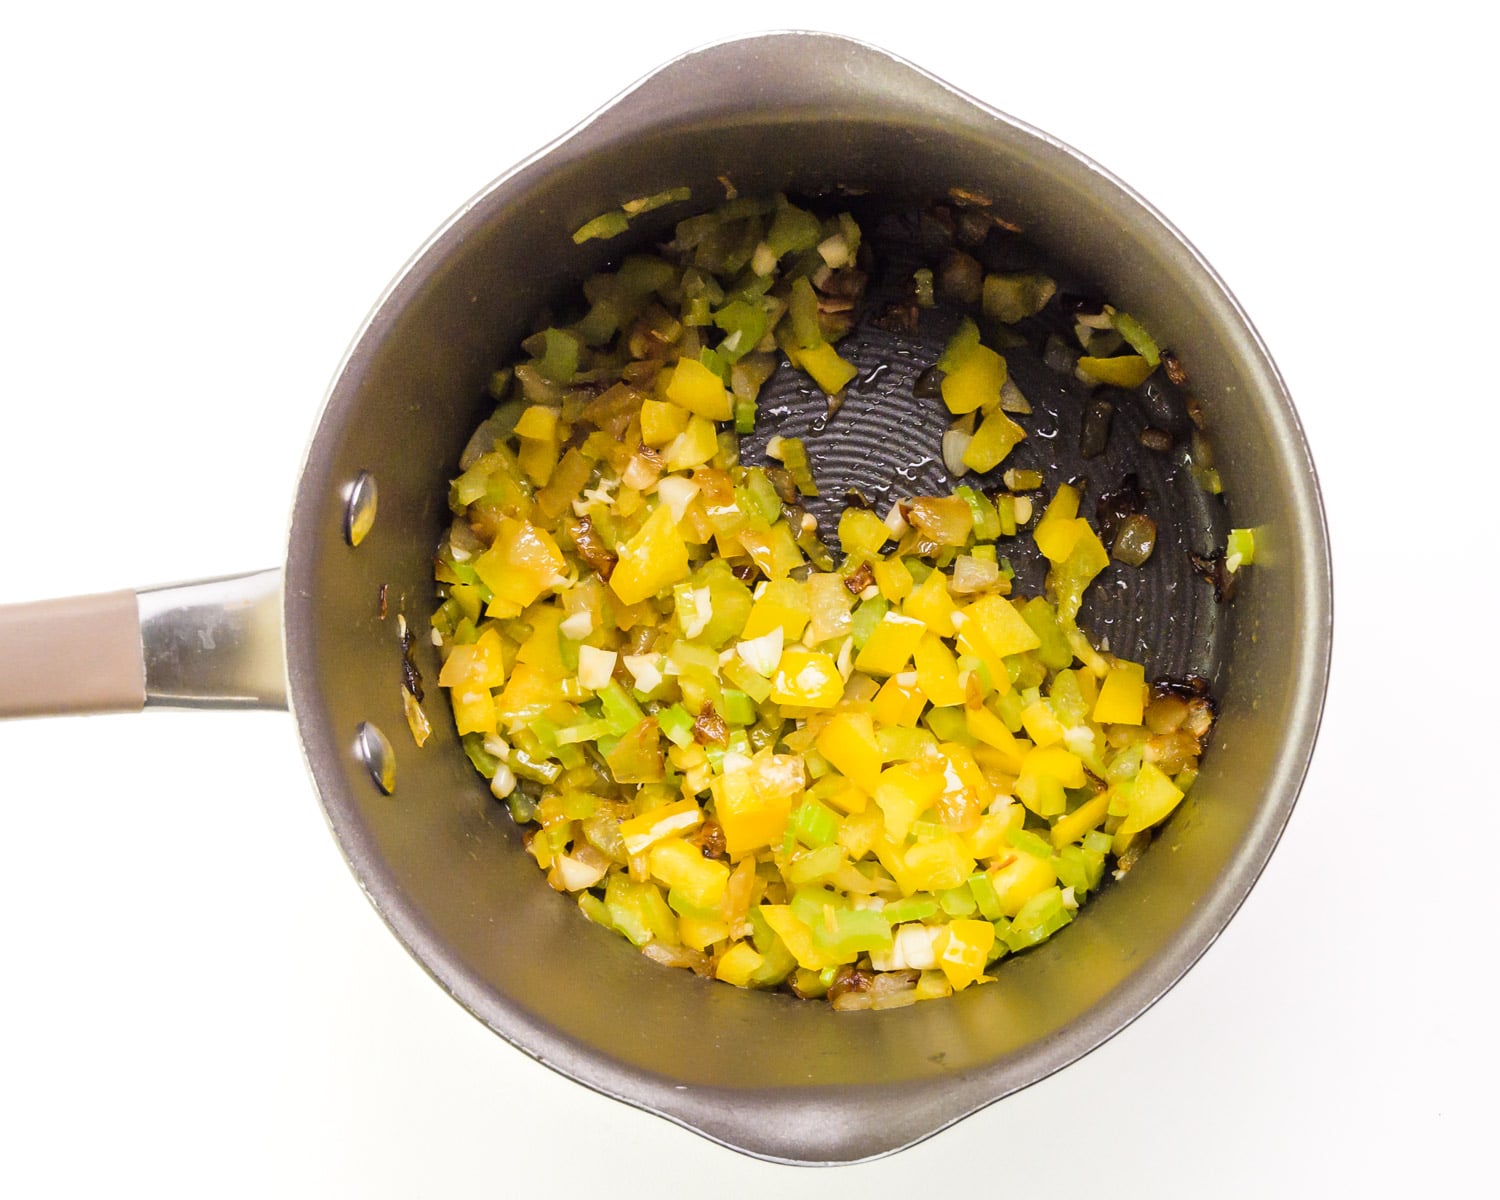 Cooked aromatic vegetables are in the bottom of a saucepan.